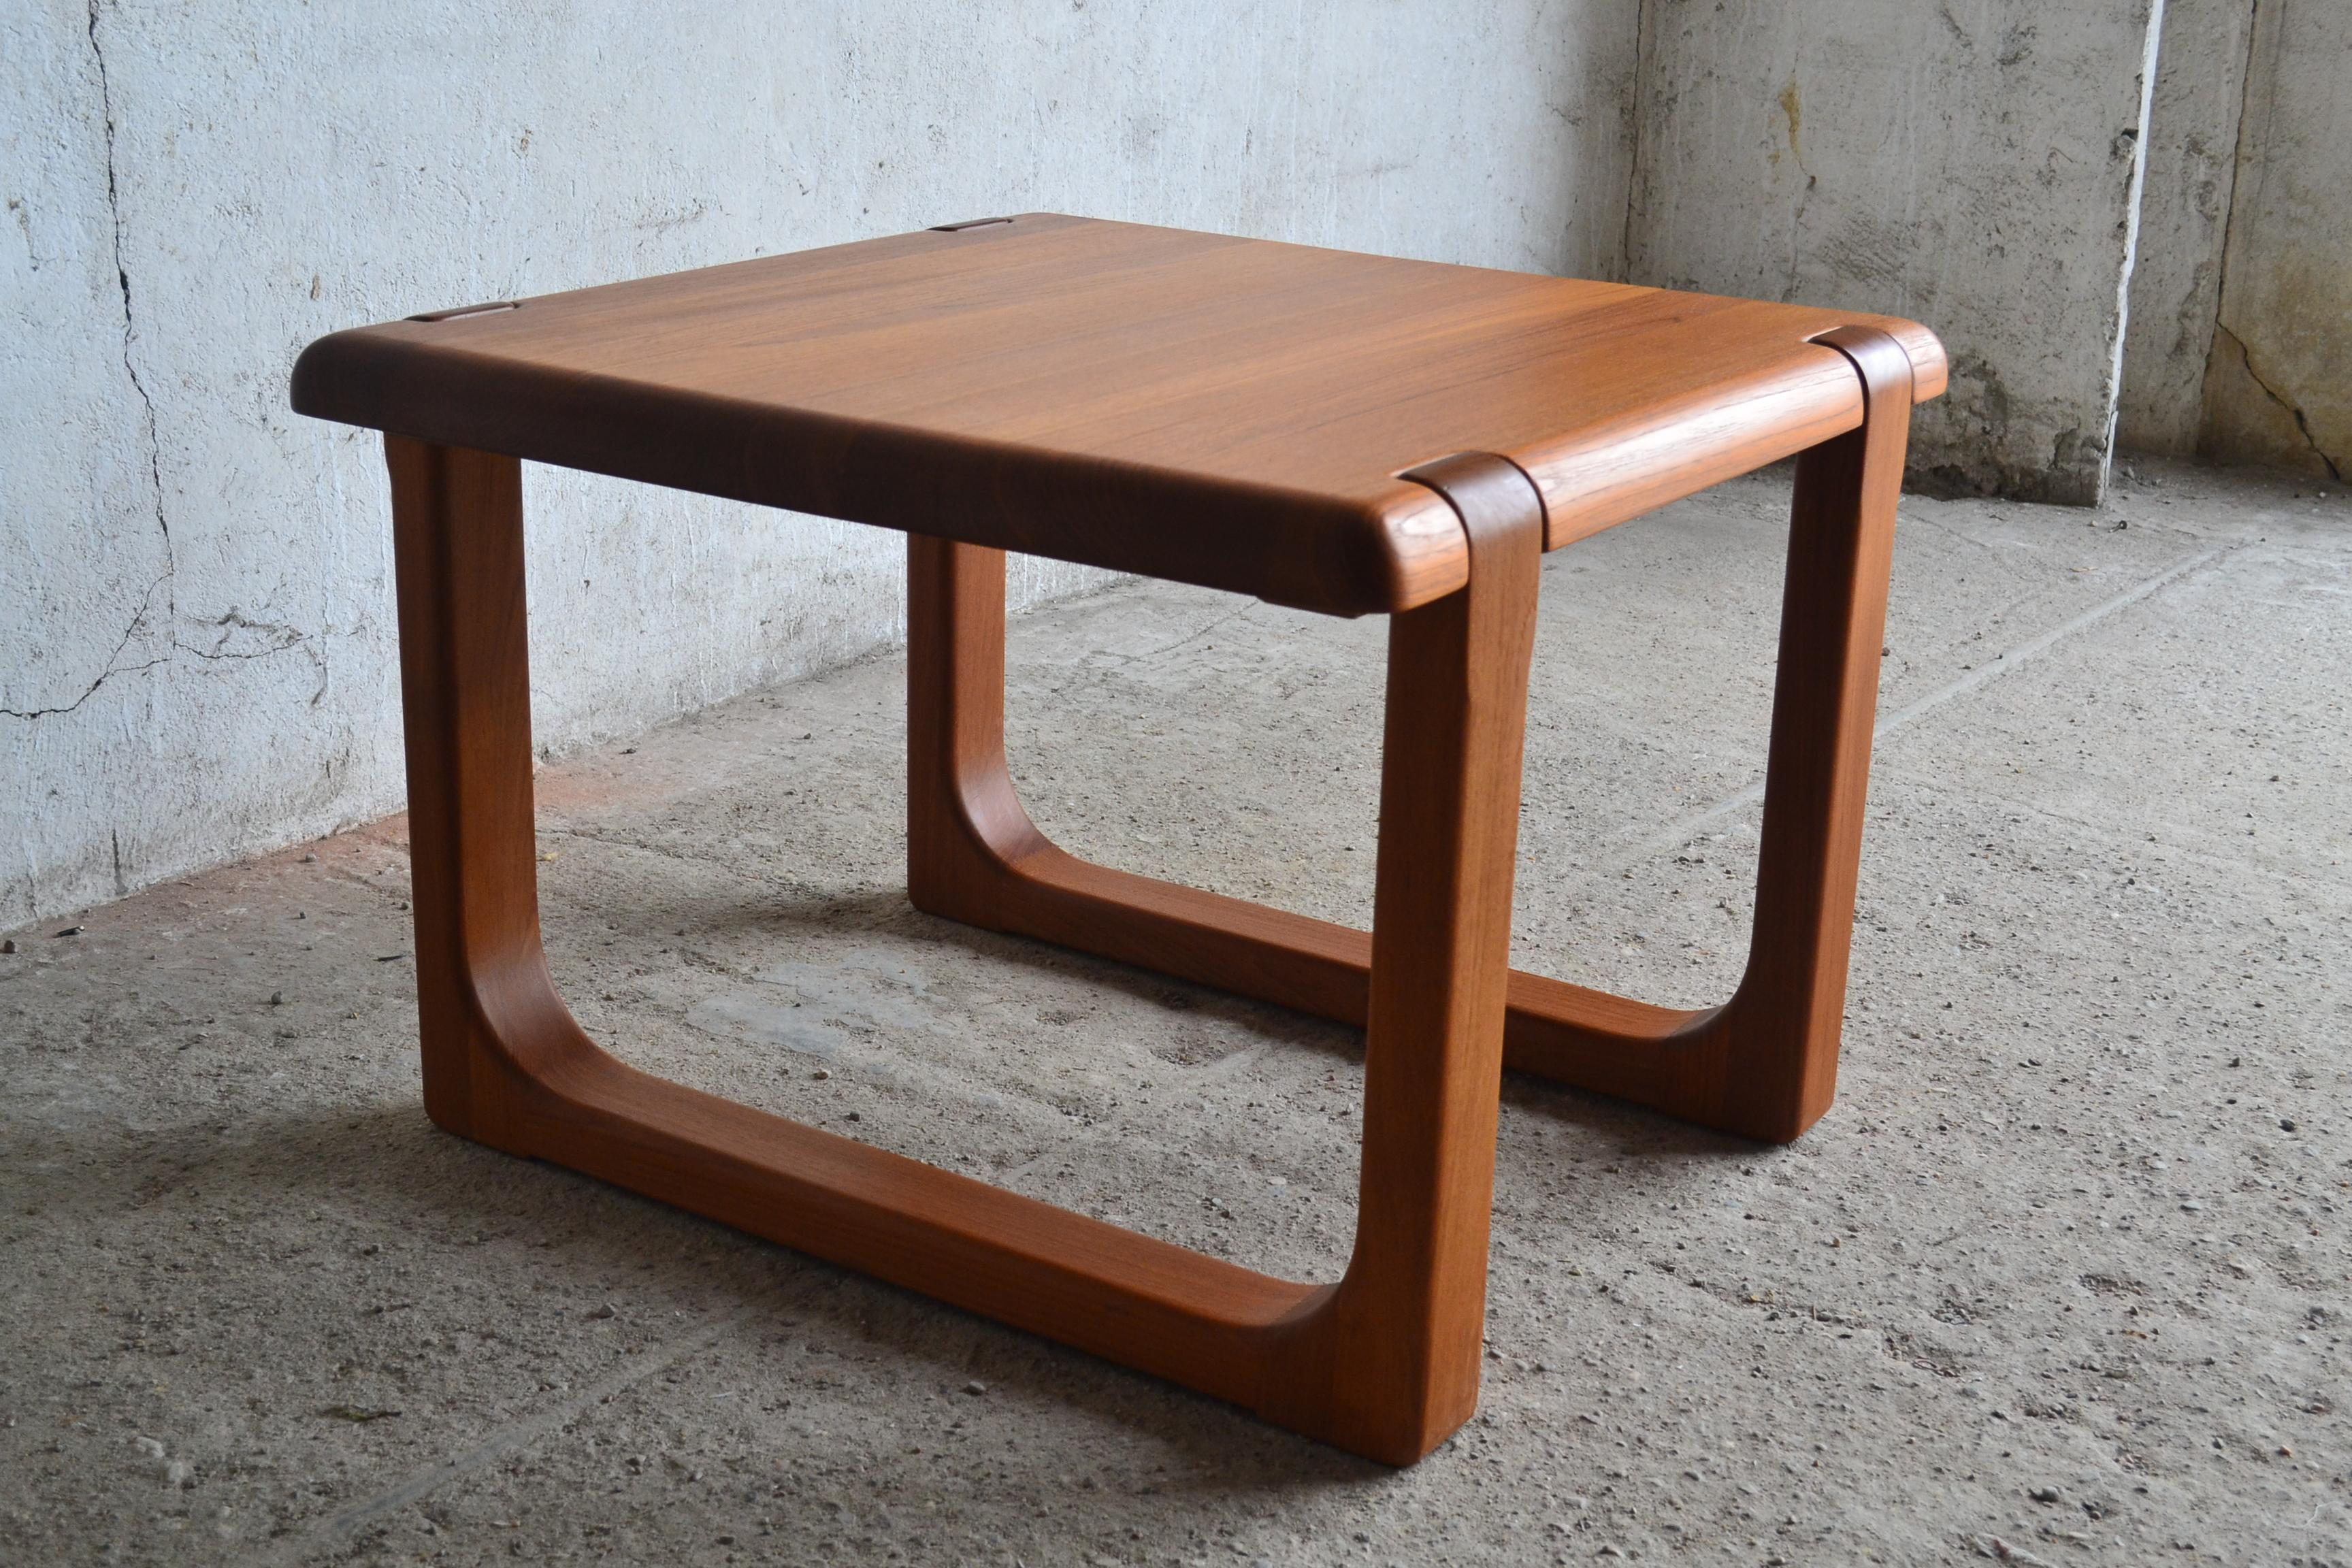 - Danish coffee table by Niels Bach
- Produced in the 1960s
- Made of solid teak wood
- Signed
- Fully original condition with no renovation.